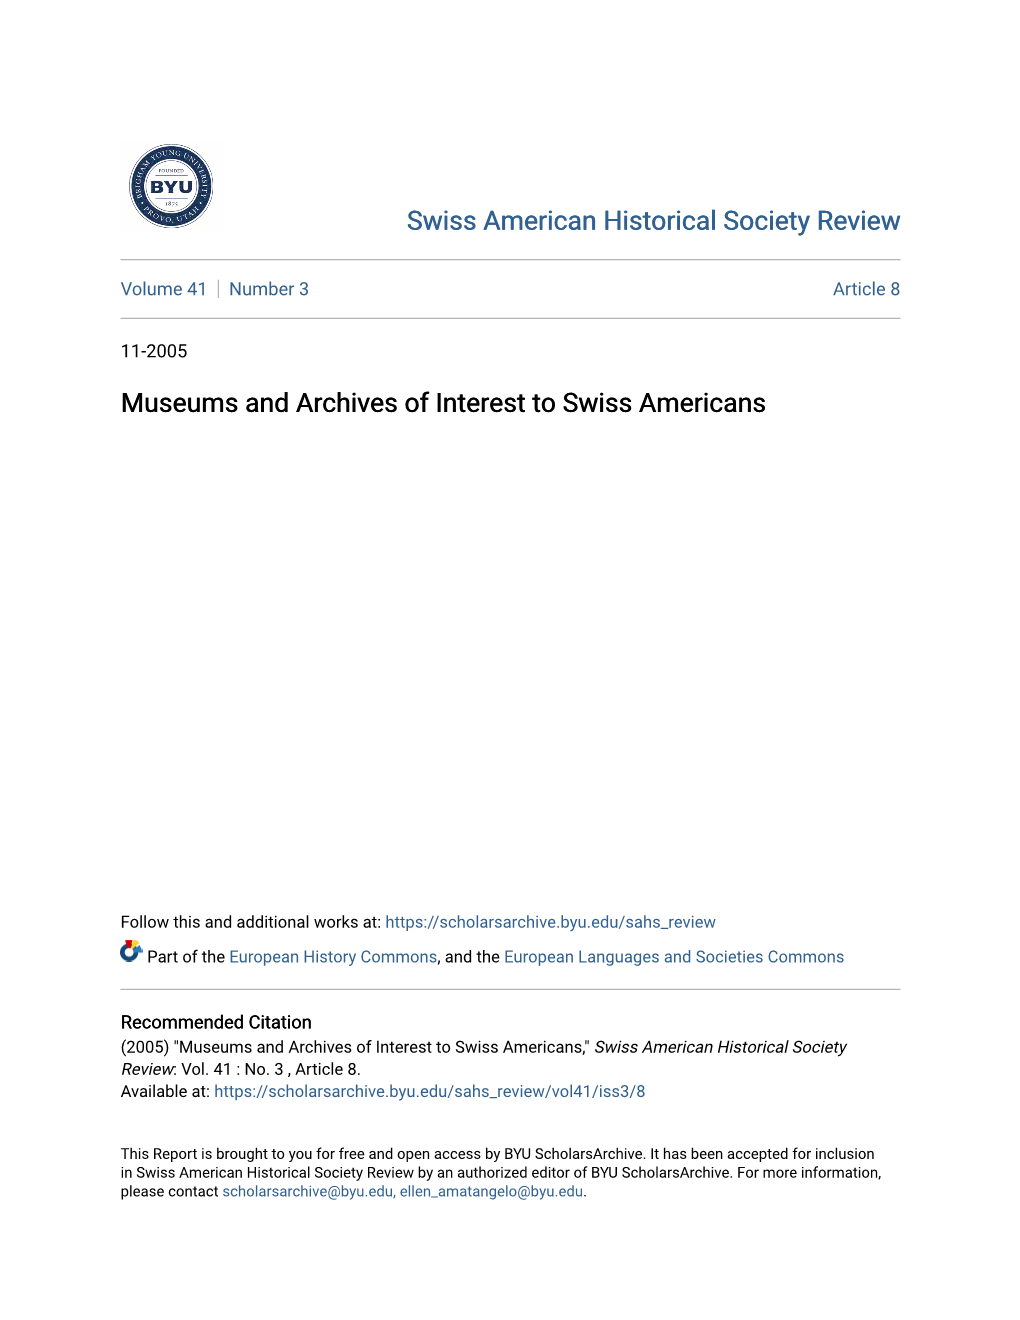 Museums and Archives of Interest to Swiss Americans